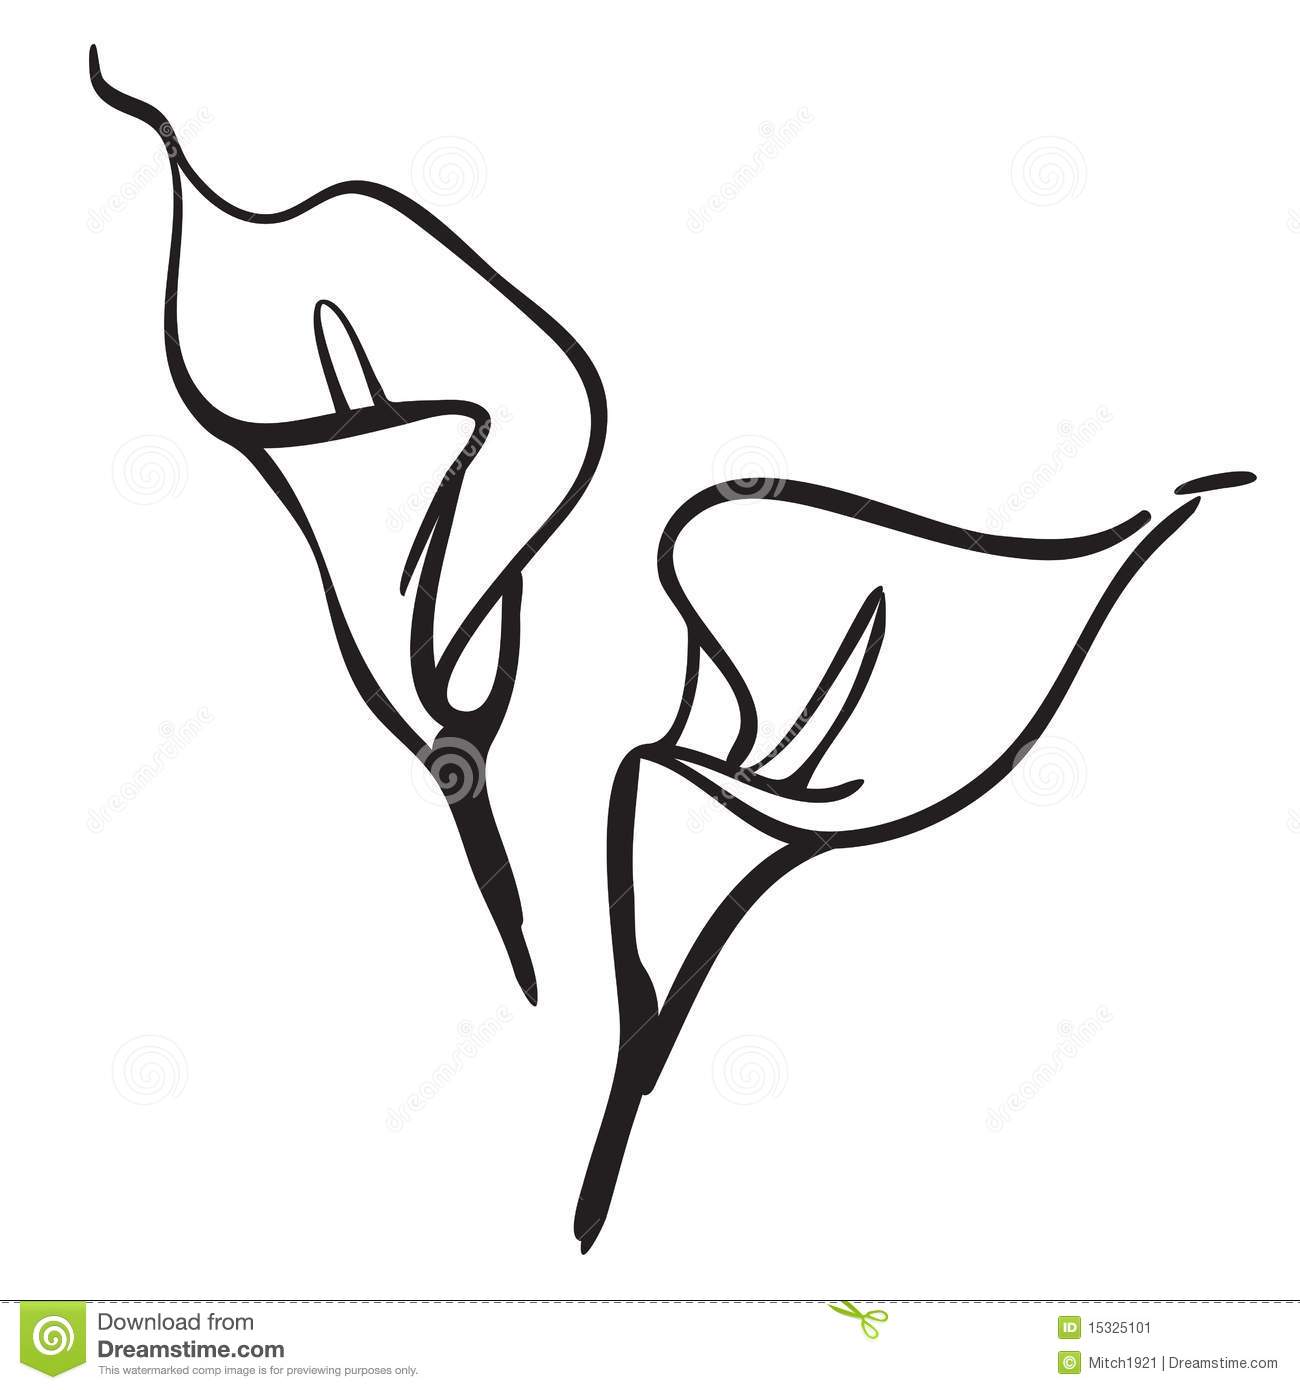 Calla Lily Flower Drawing